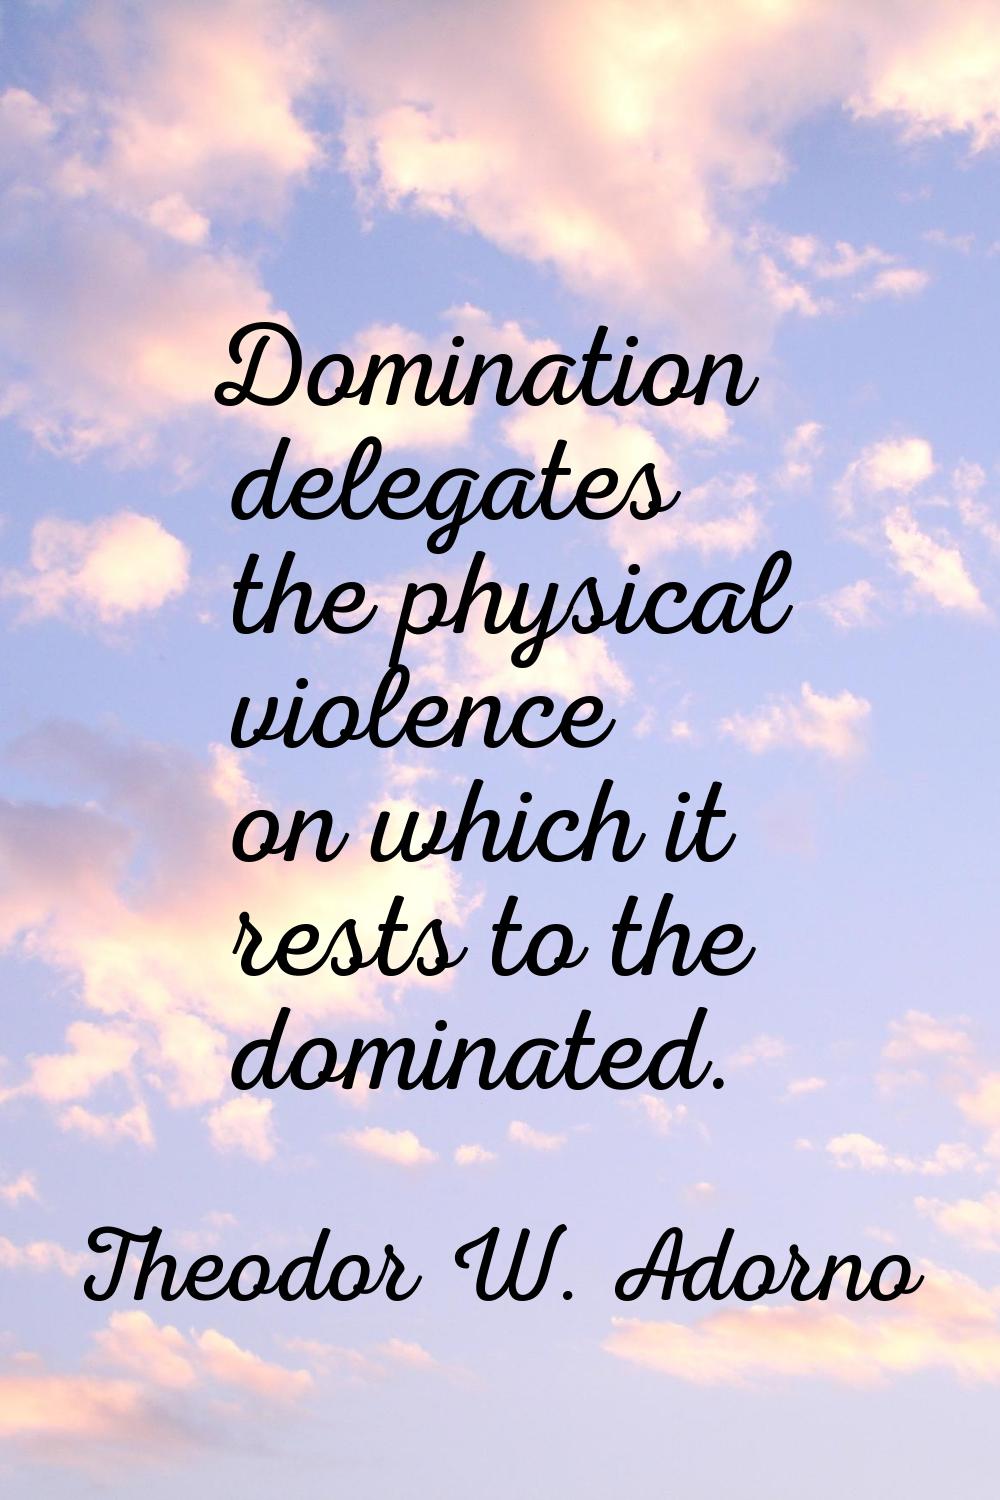 Domination delegates the physical violence on which it rests to the dominated.